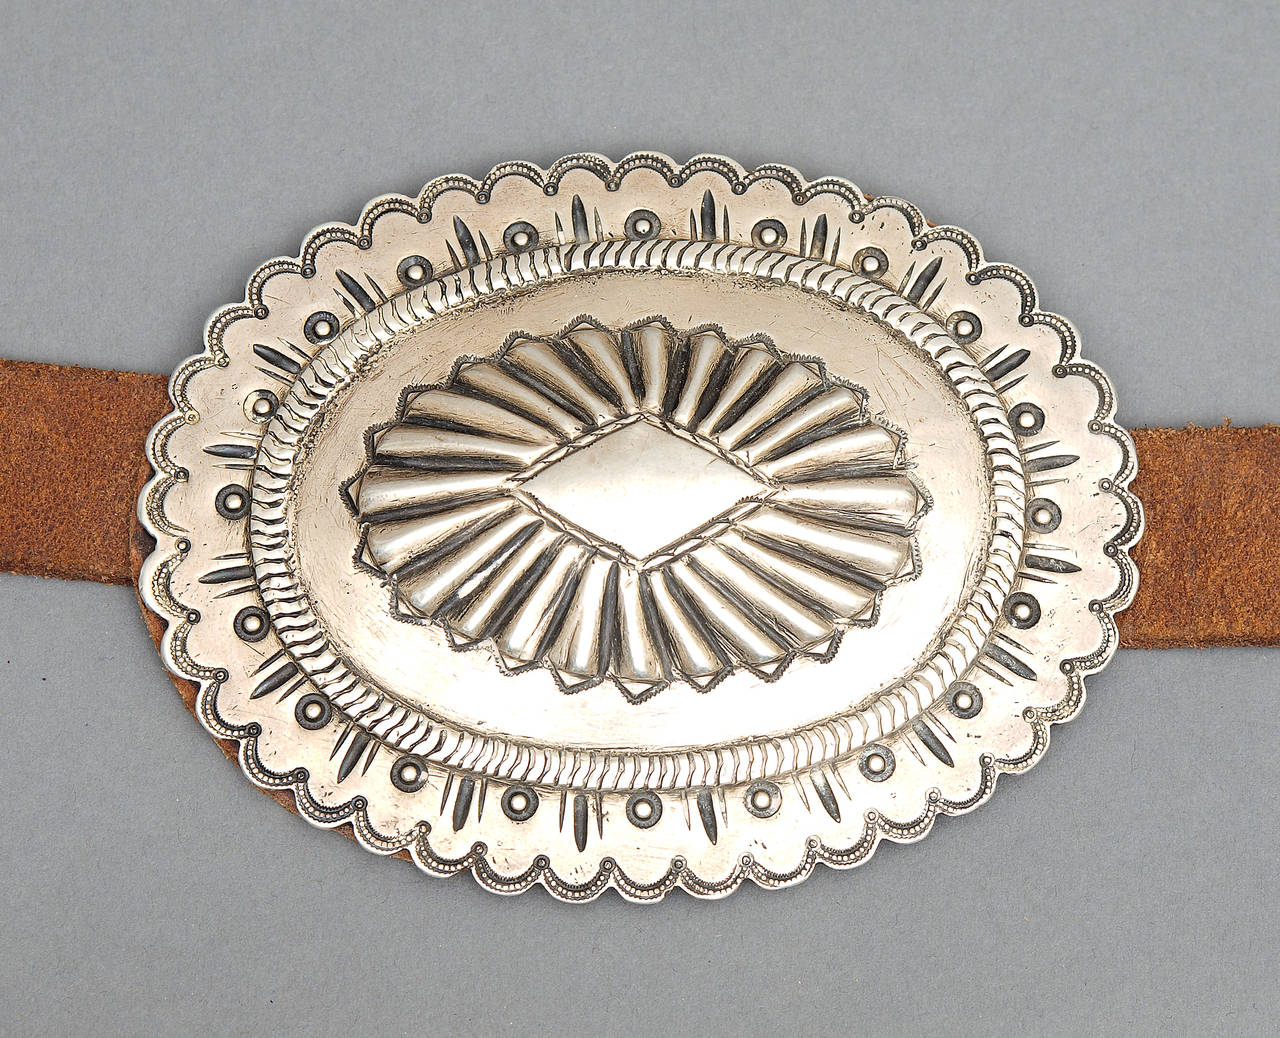 Expertly made by a Navajo silversmith during the early part of the 20th century in the Second Phase style. Six conchas each measuring approximately 3.5 x 4.5 inches. The buckle measures approximately 3 x 3.25 inches.

The leather measures 43